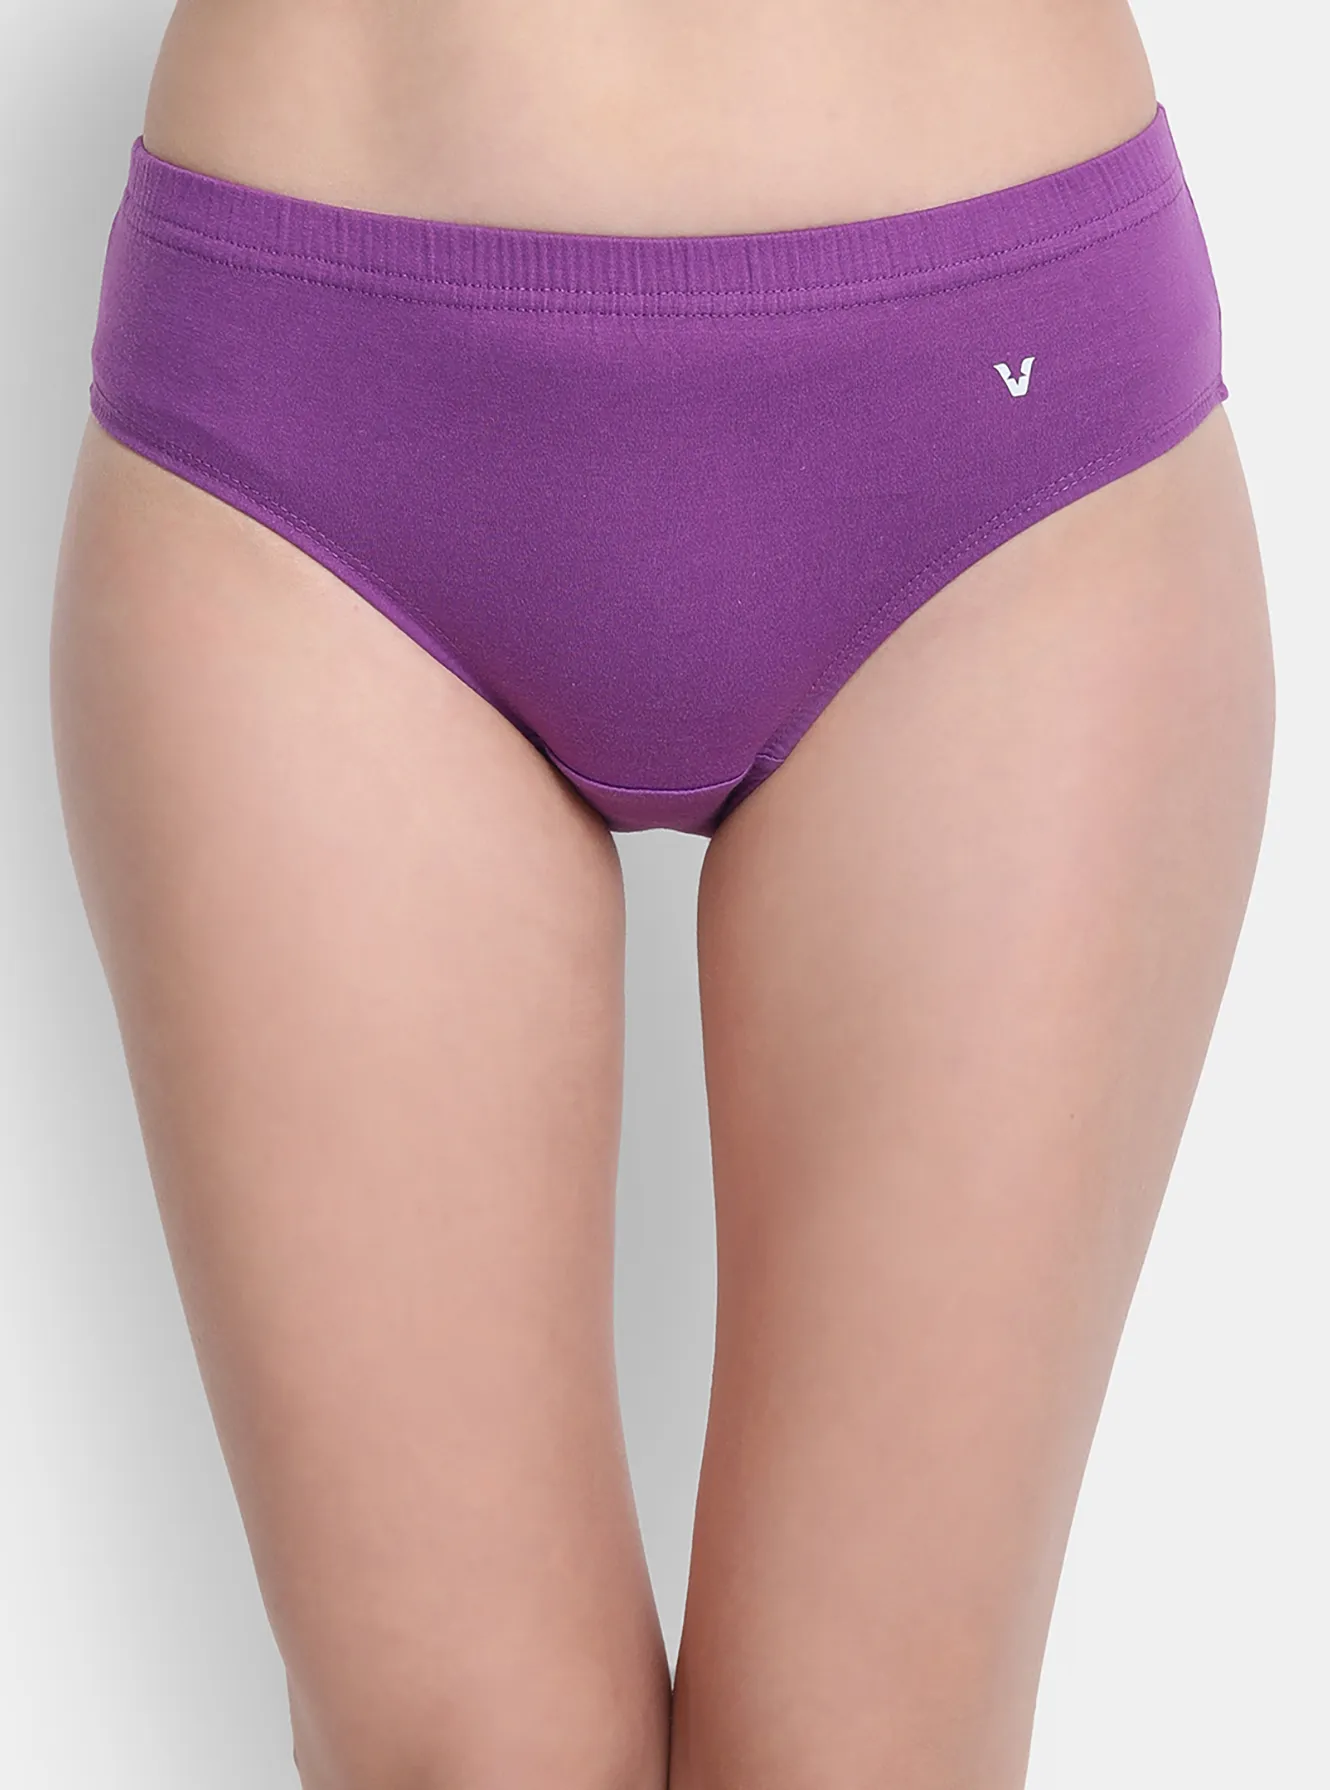 High waist panty with concealed waistband - Pack of 3, Buy Mens & Kids  Innerwear